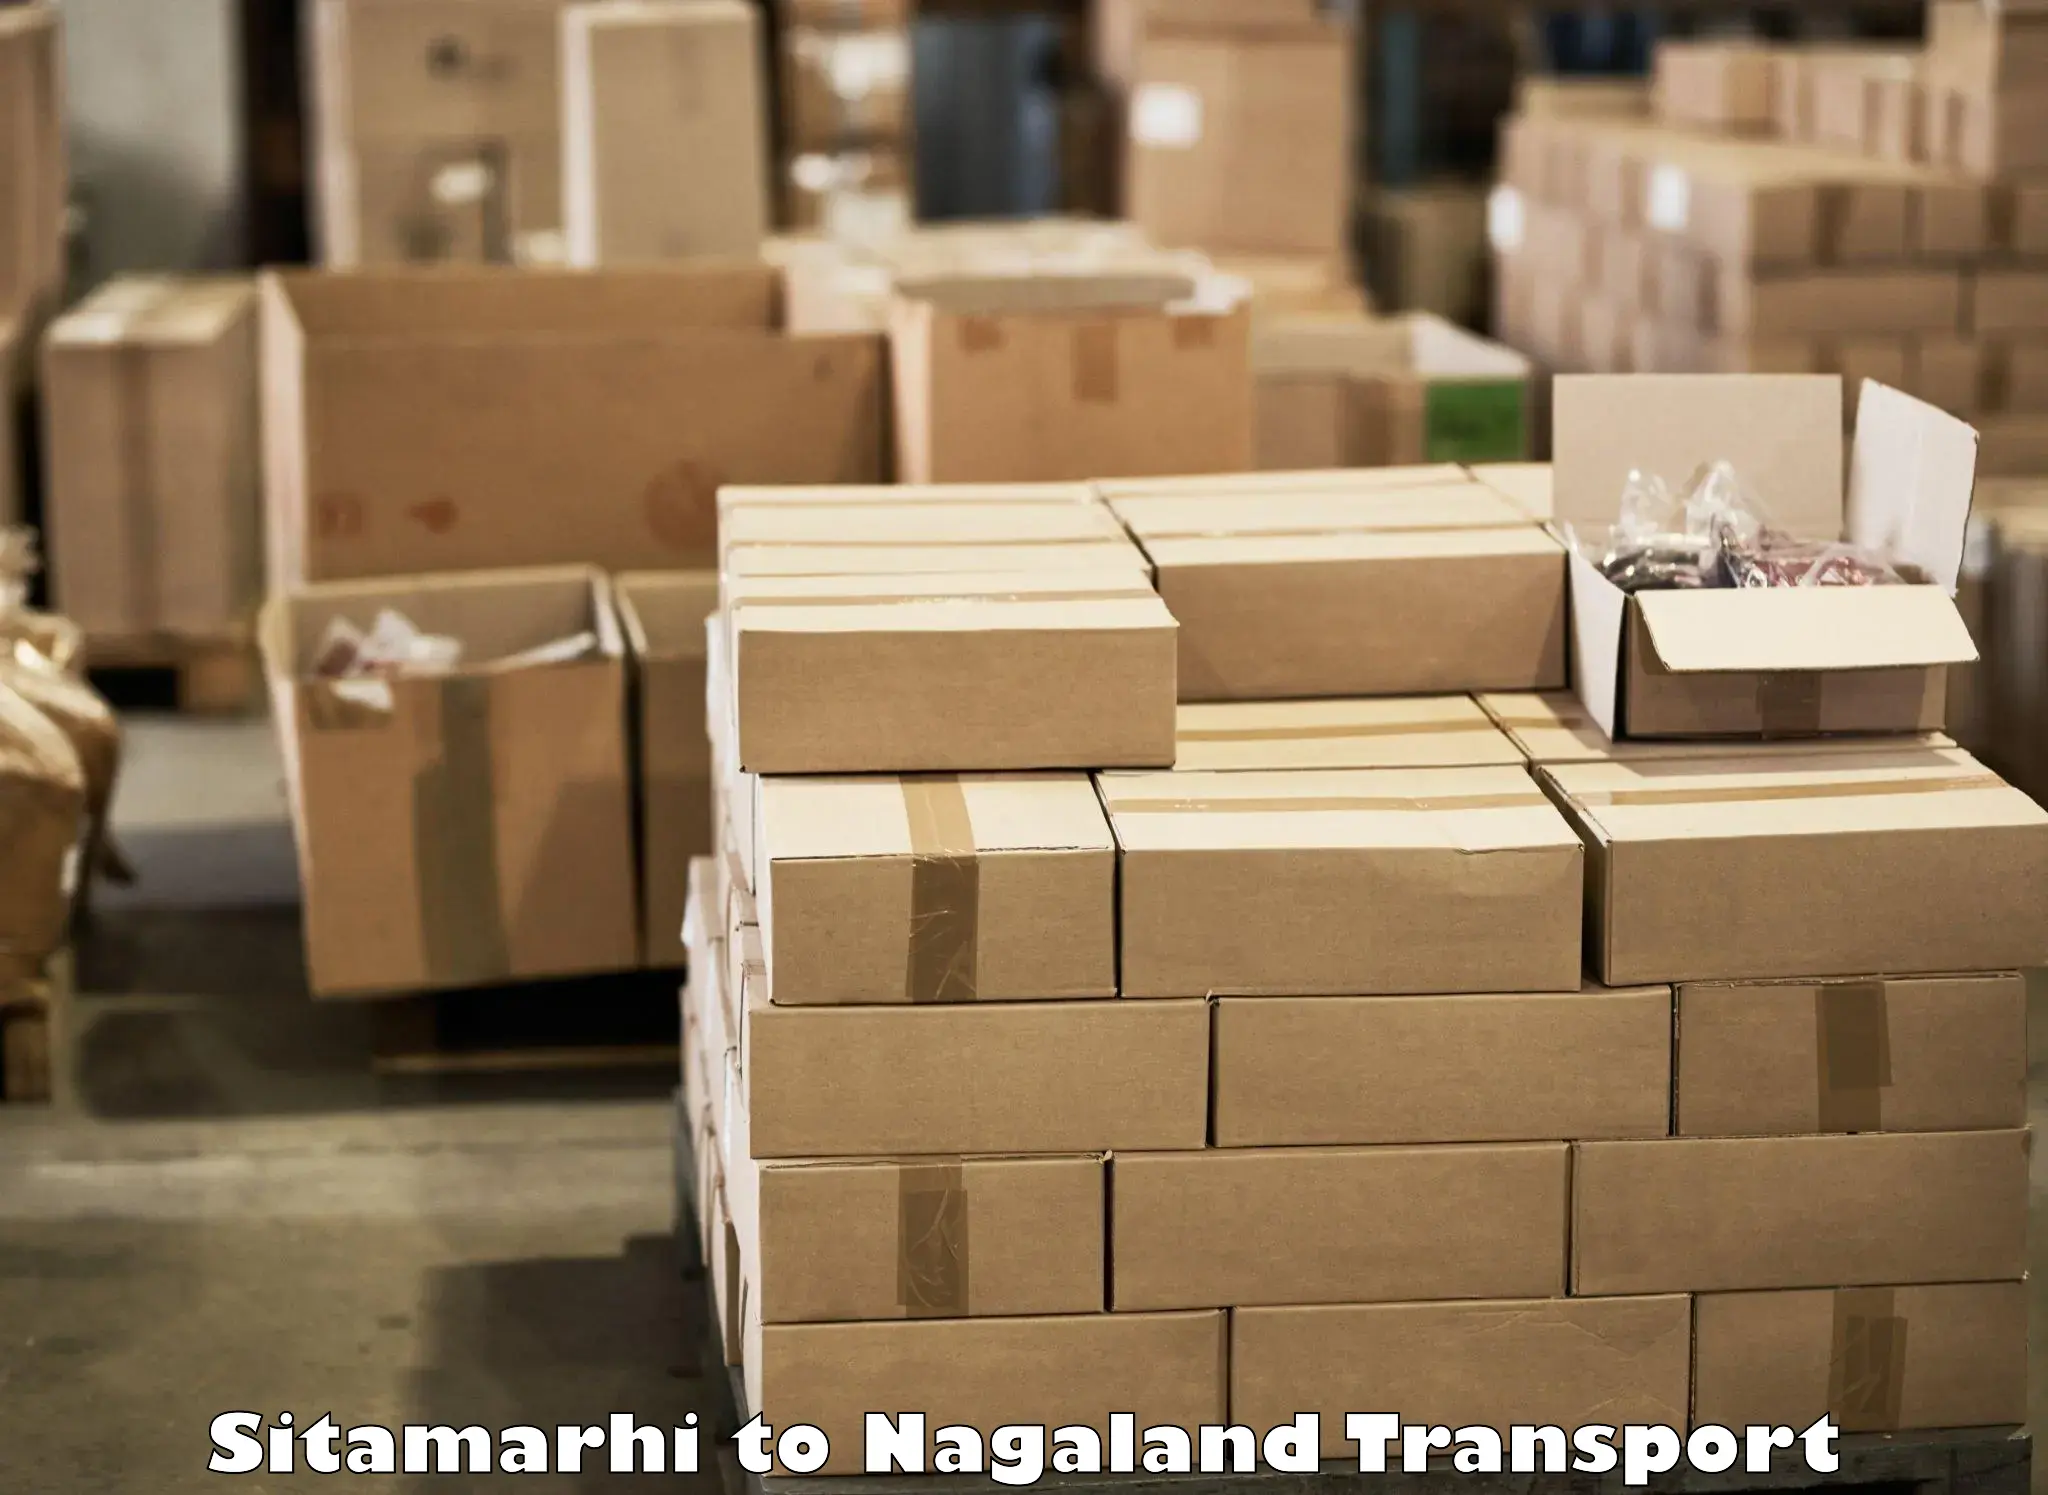 Goods delivery service Sitamarhi to Nagaland